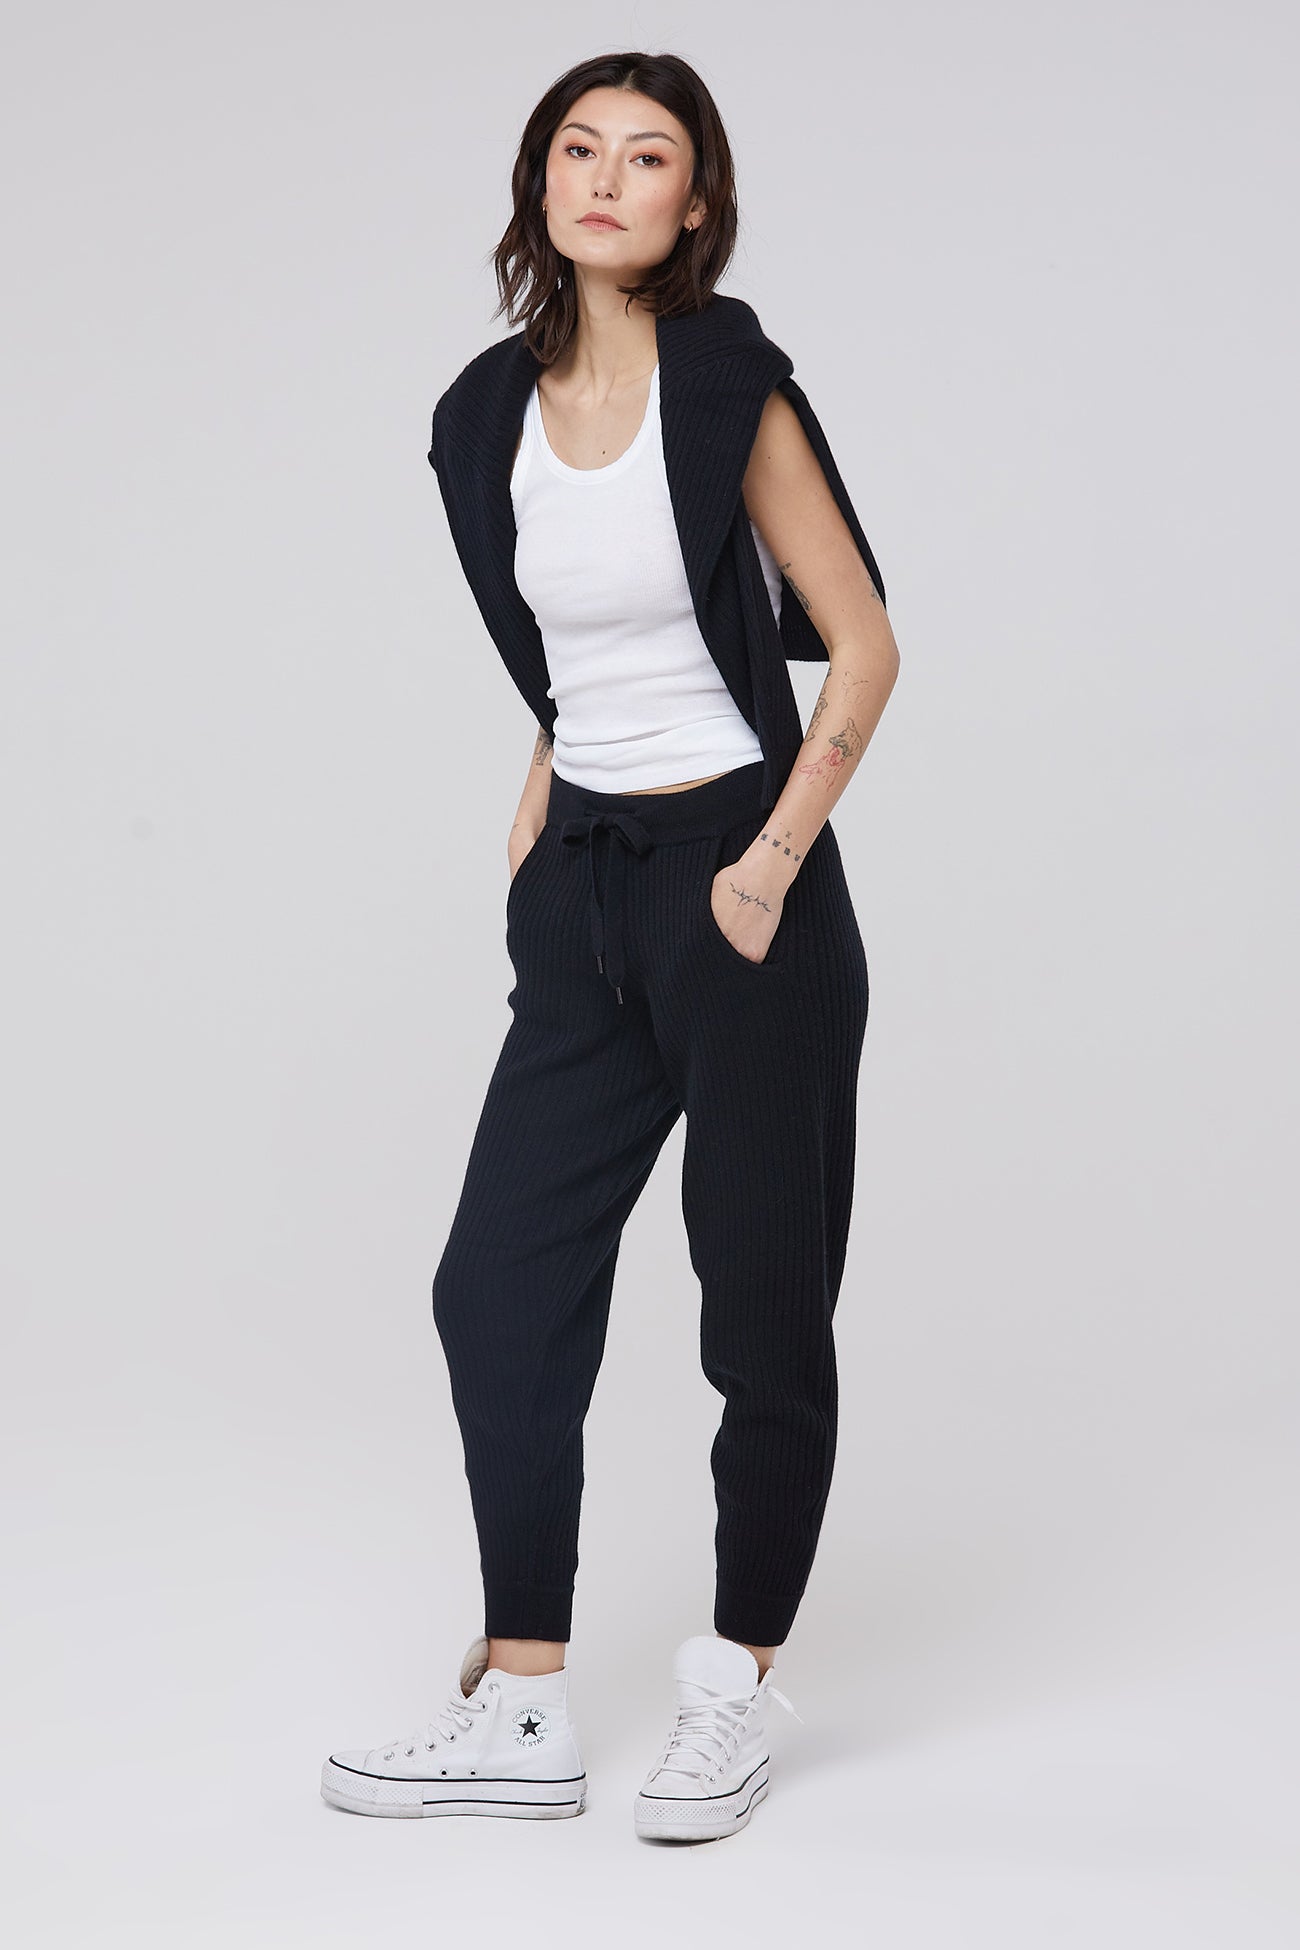 Cashmere Pant in Grey  Autumn Cashmere